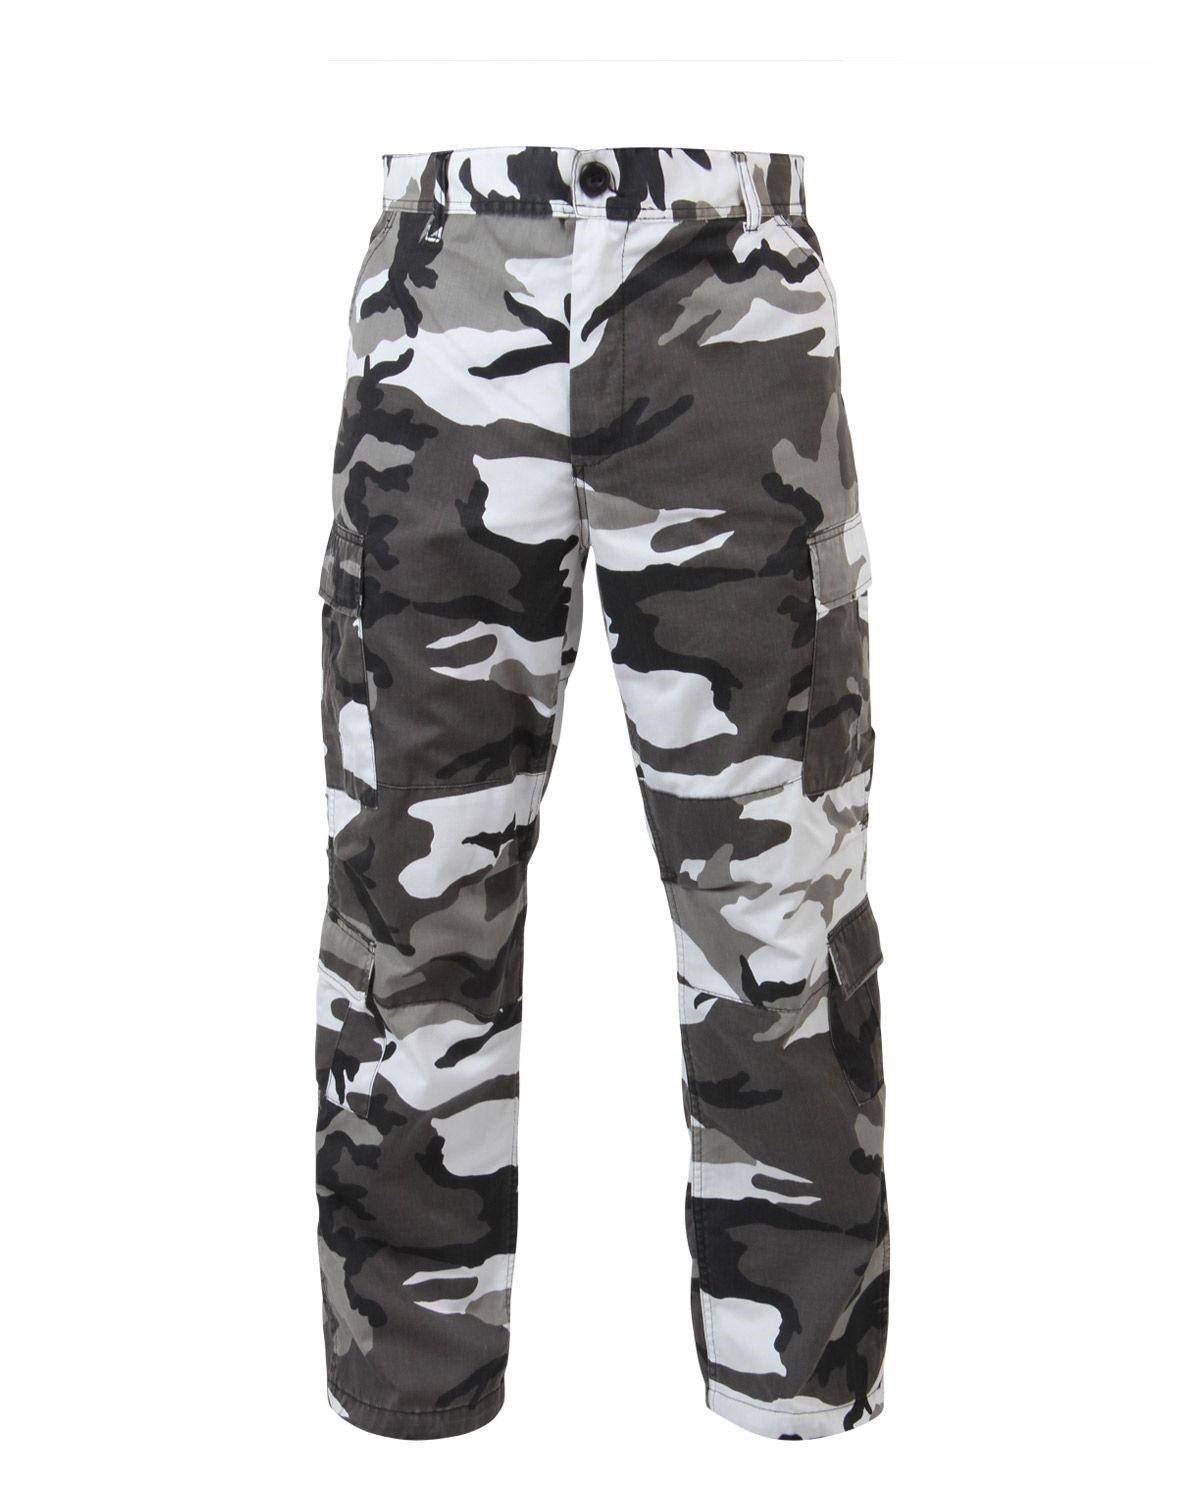 pants men | Camouflage & Military pants Army Star